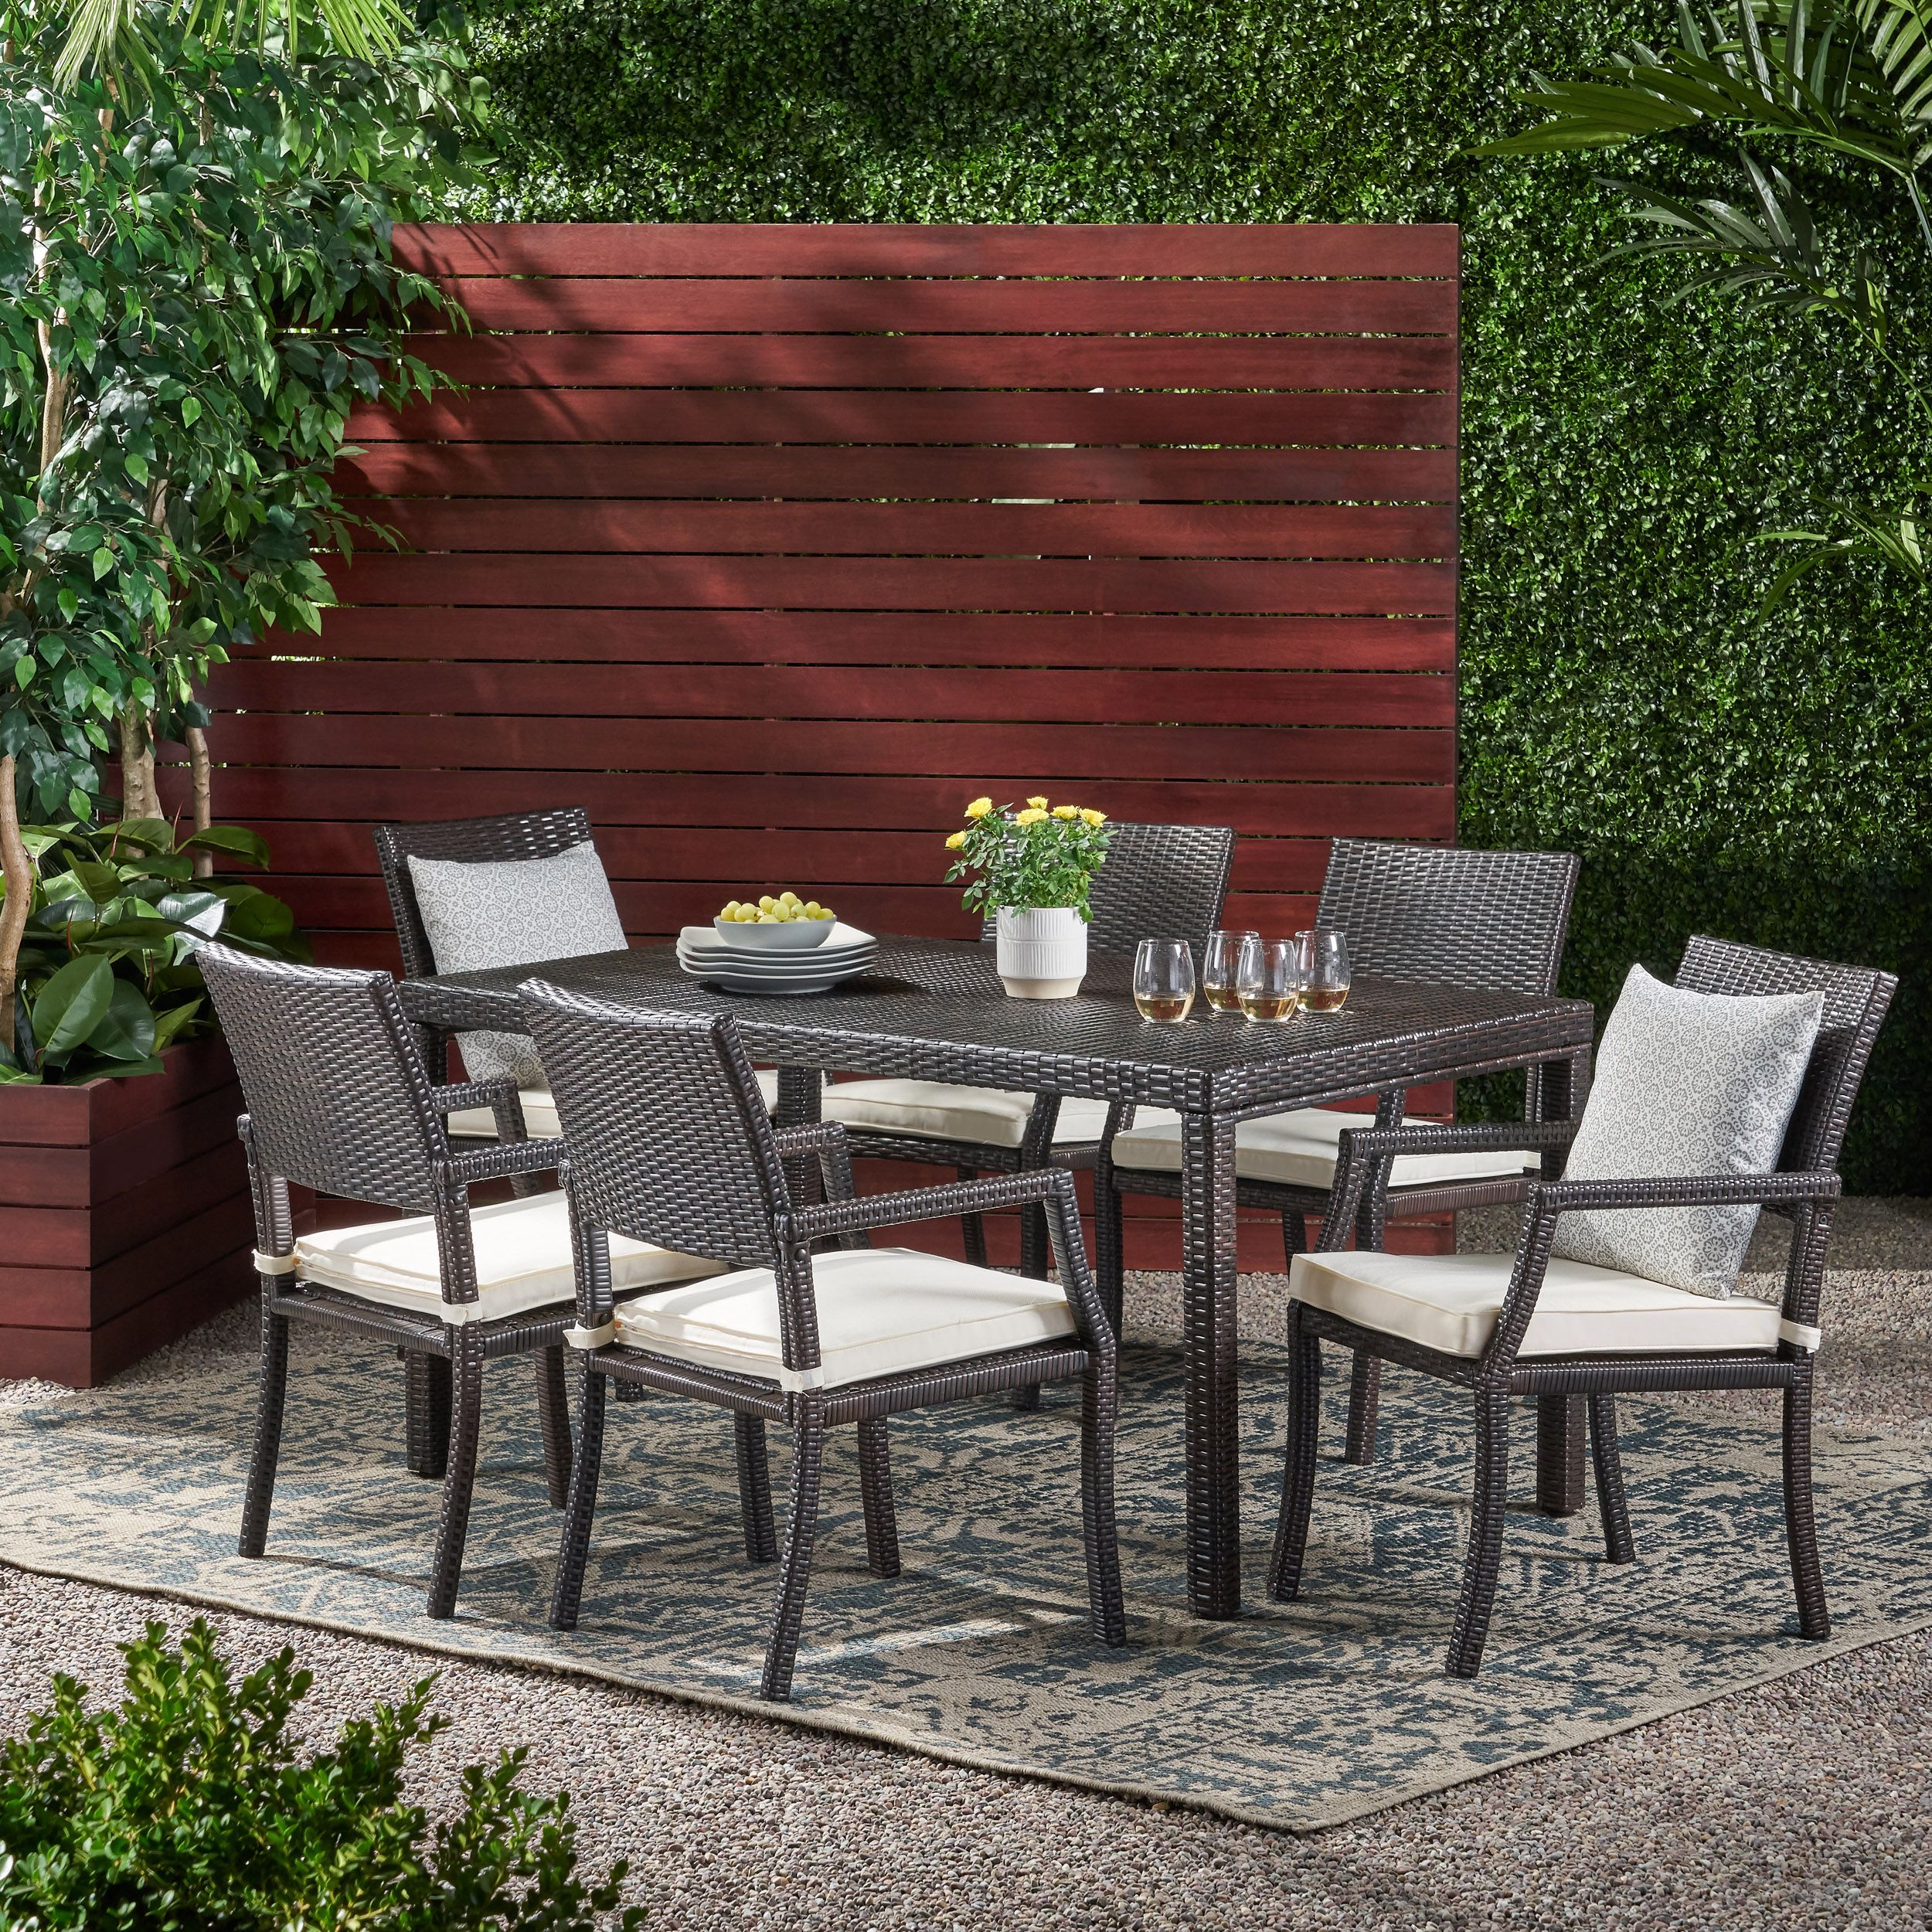 Outdoor 7 Piece Wicker Rectangular Dining Set,Multibrown,White Within Rectangular Patio Dining Sets (View 1 of 15)